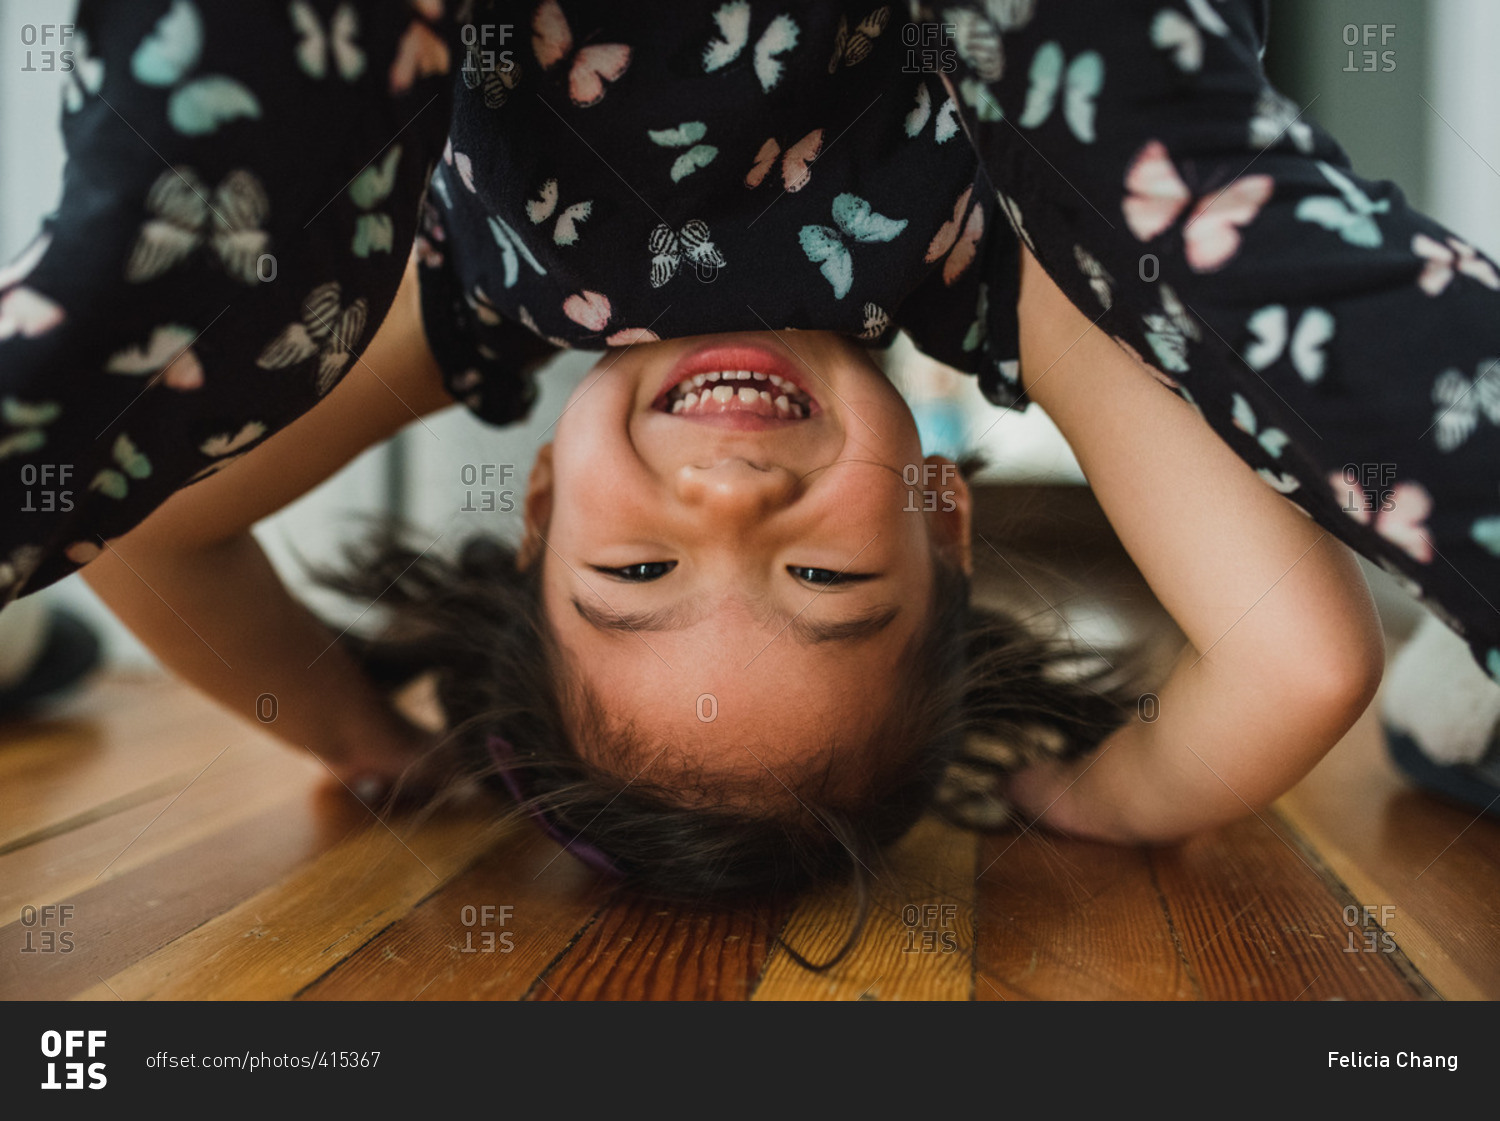 Little girl looking between her legs at the camera and smiling